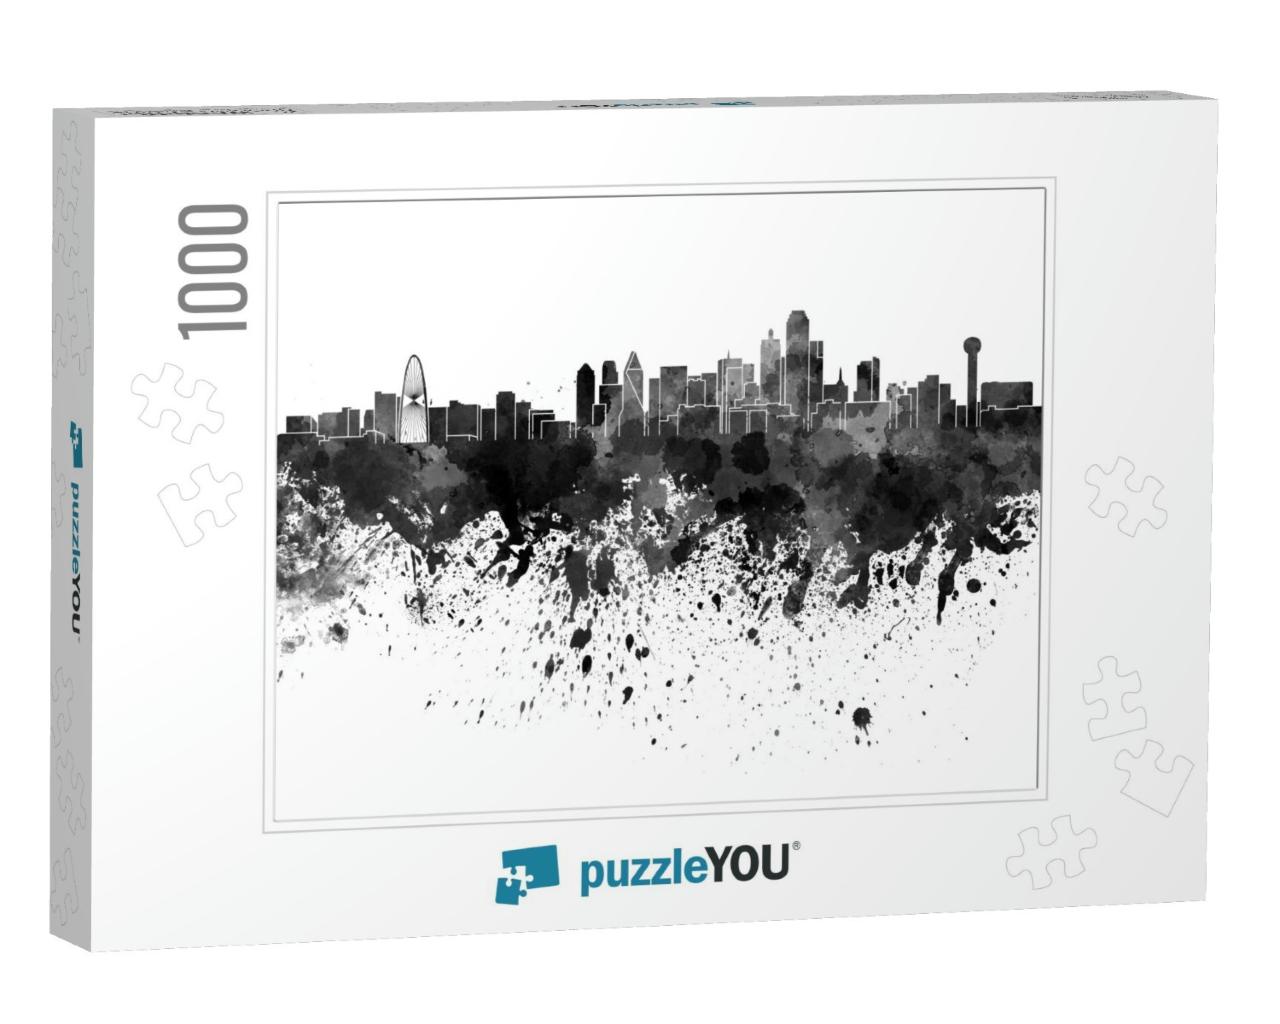 Dallas Skyline in Black Watercolor... Jigsaw Puzzle with 1000 pieces